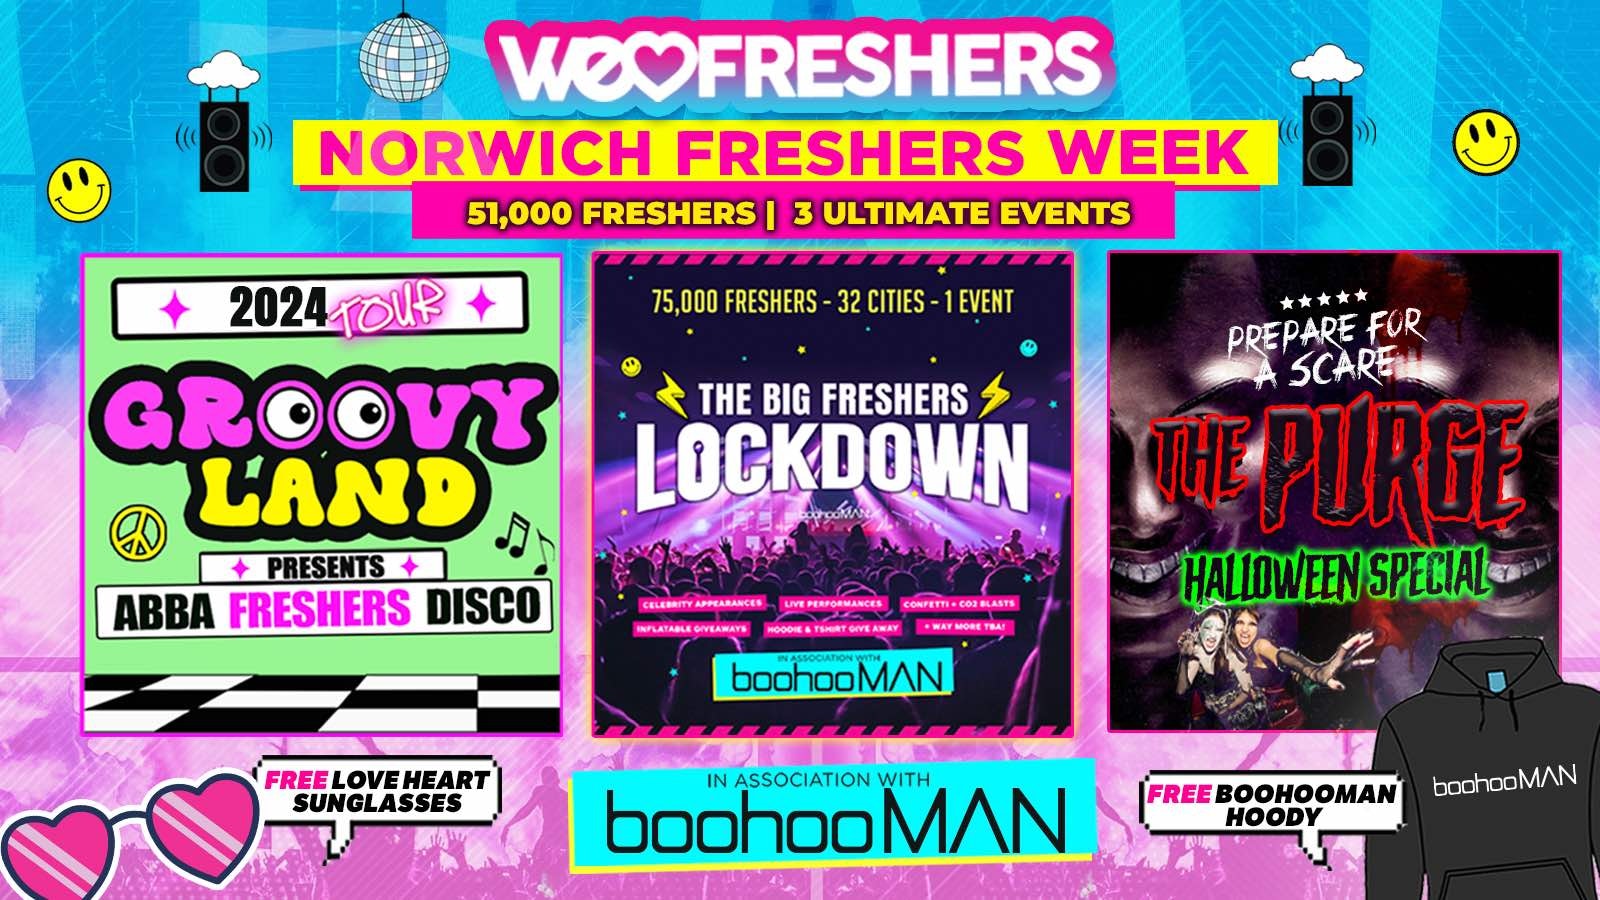 WE LOVE NORWICH FRESHERS 2024 in association with boohooMAN